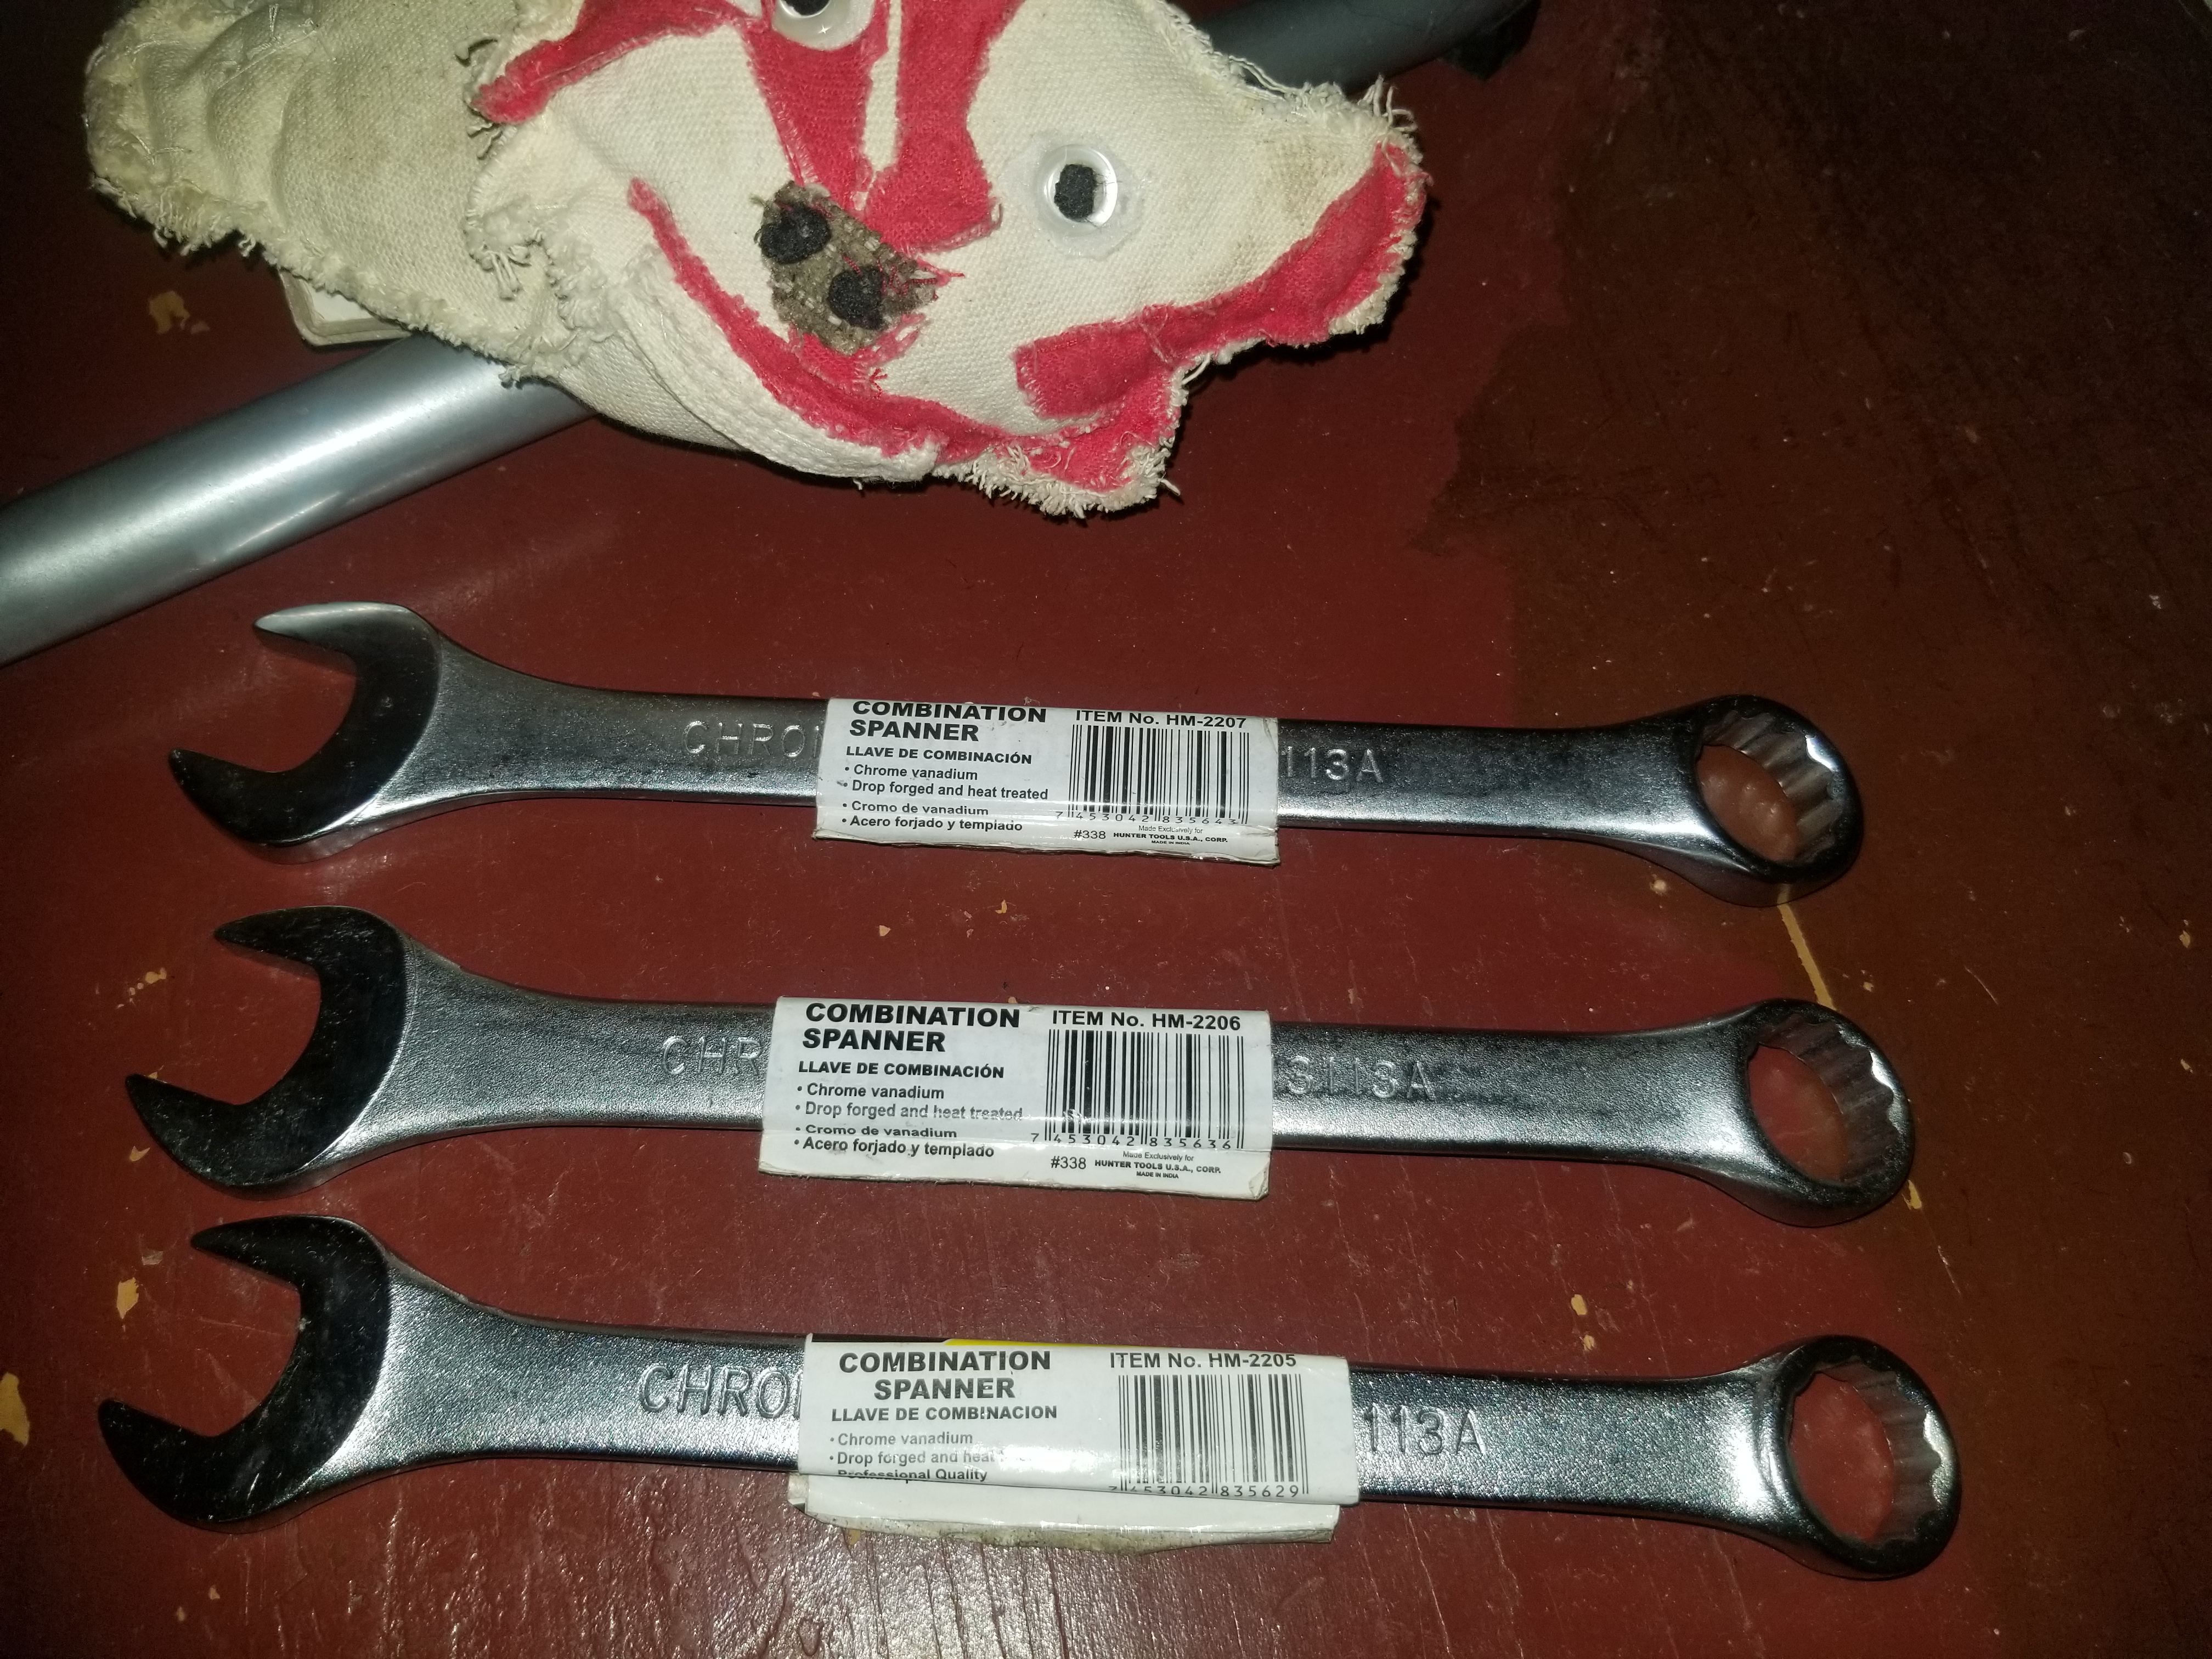 fake-hunter-american-tools-made-exclusively-for-hunter-tools-usa-corp-wrench-made-in-india